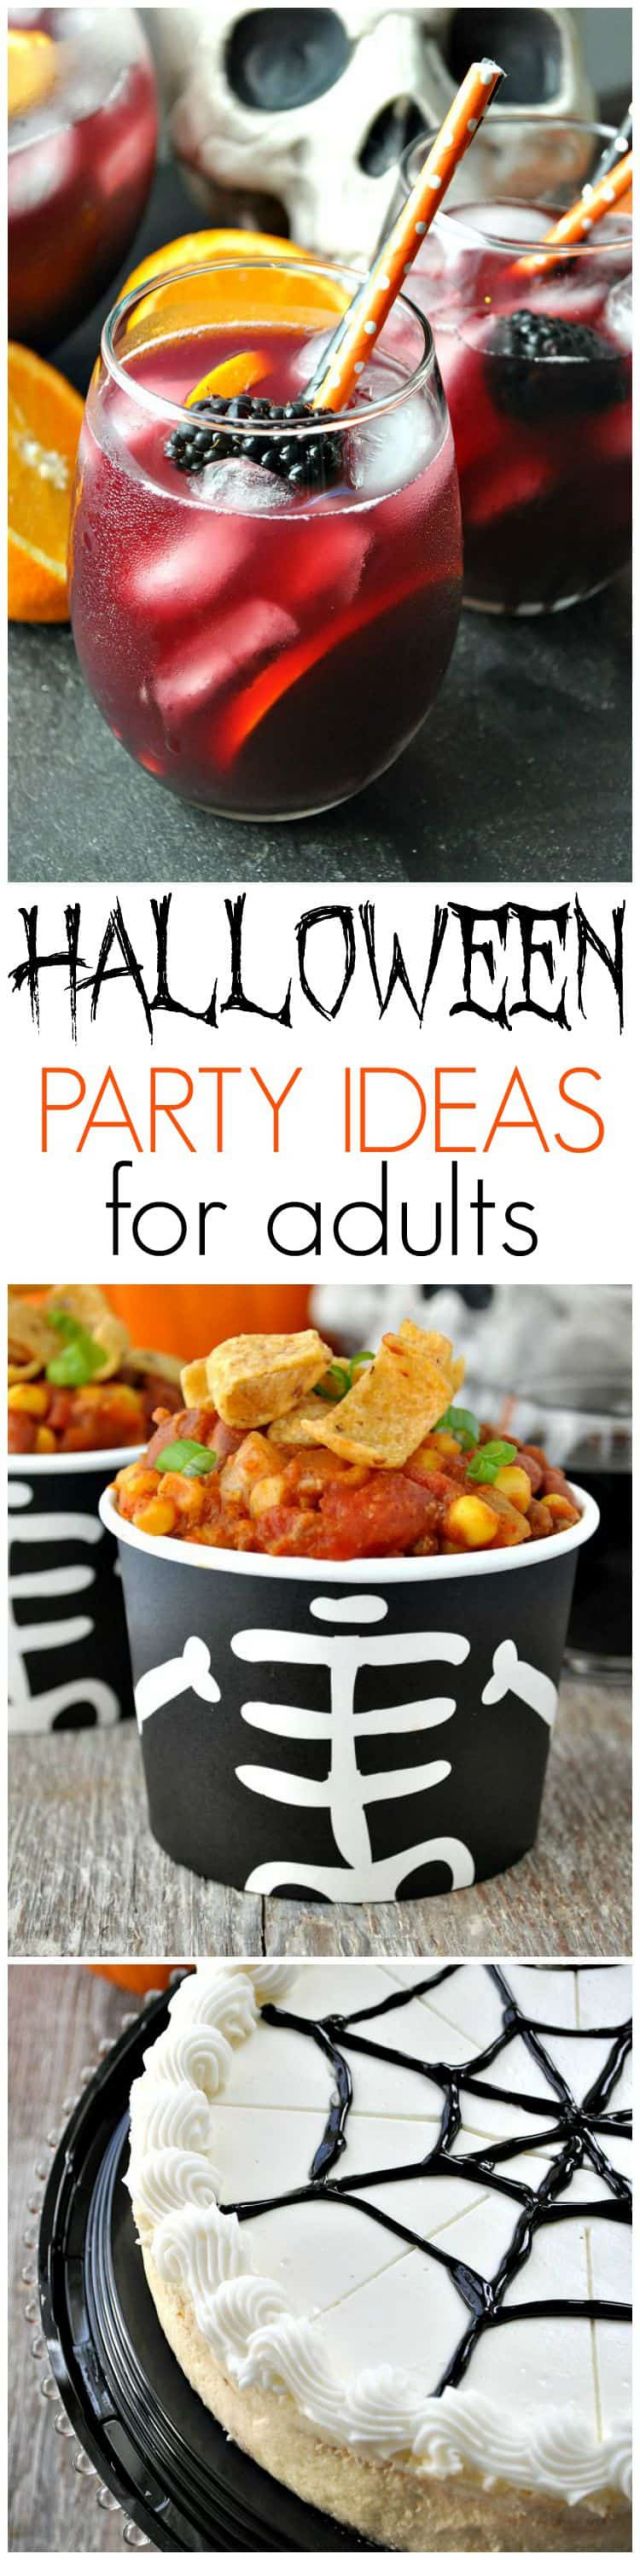 Halloween Party Event Ideas
 Slow Cooker Pumpkin Chili Halloween Party Ideas for